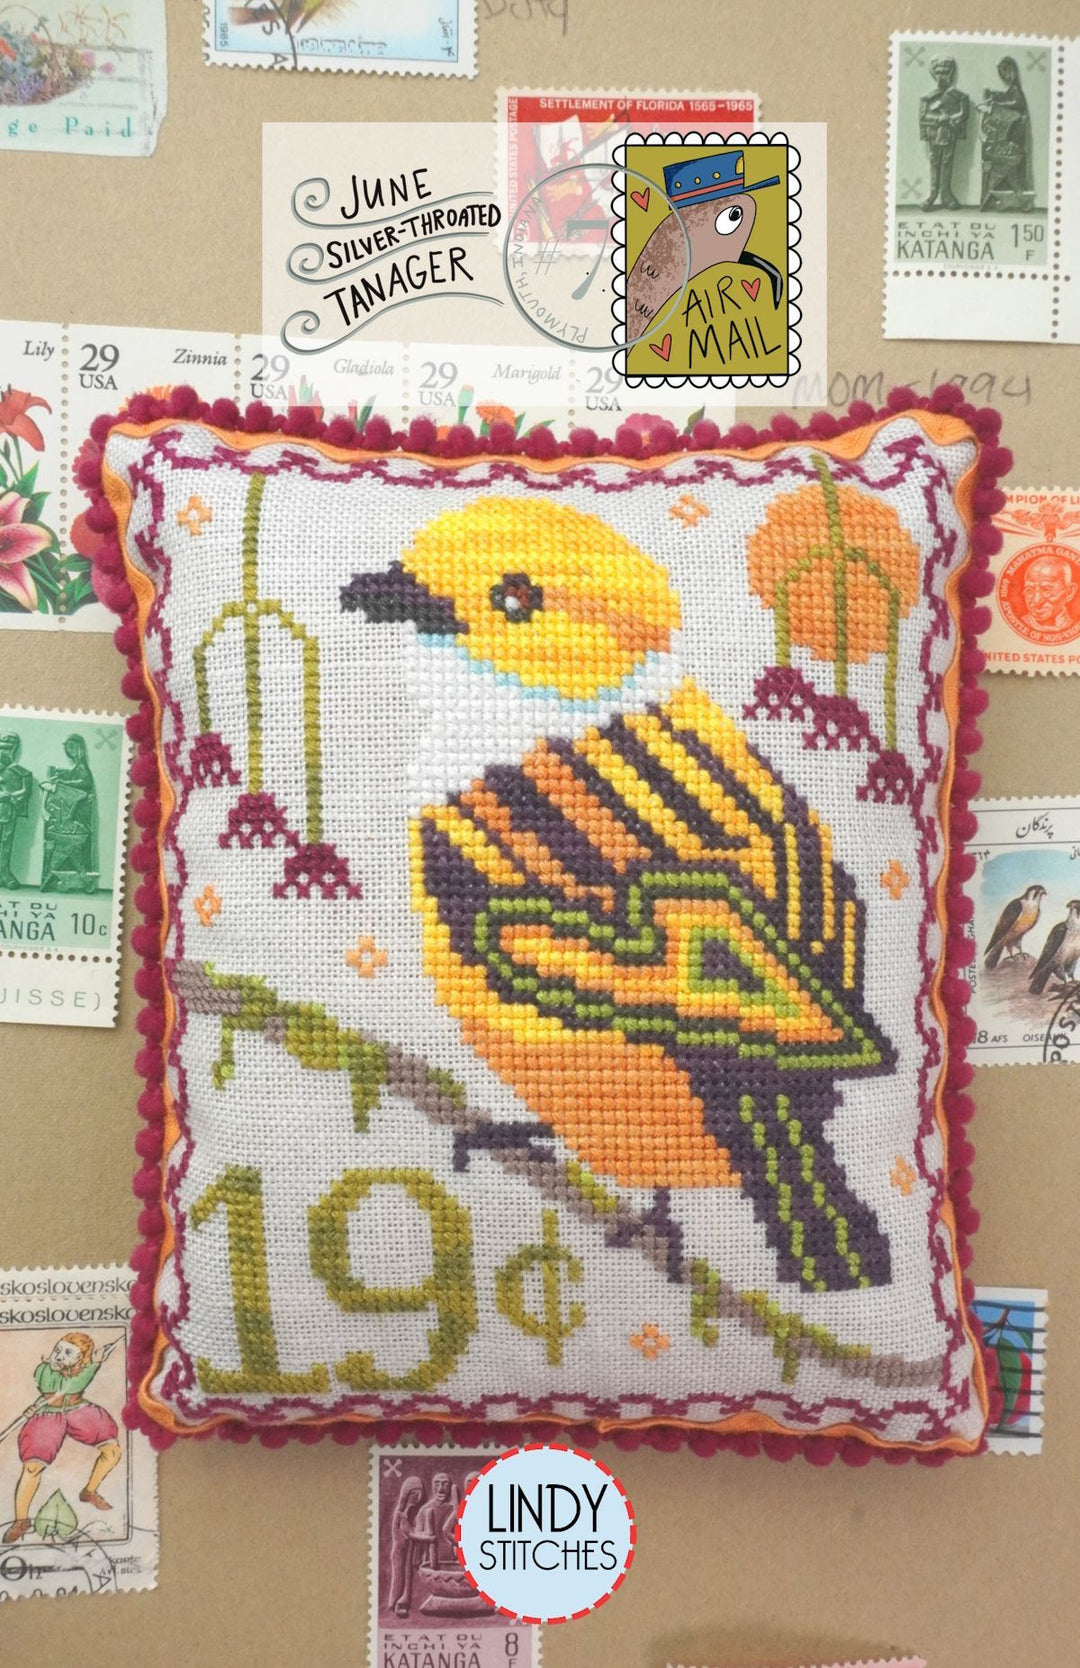 Air Mail June - Silver-Throated Tanager | Lindy Stitches